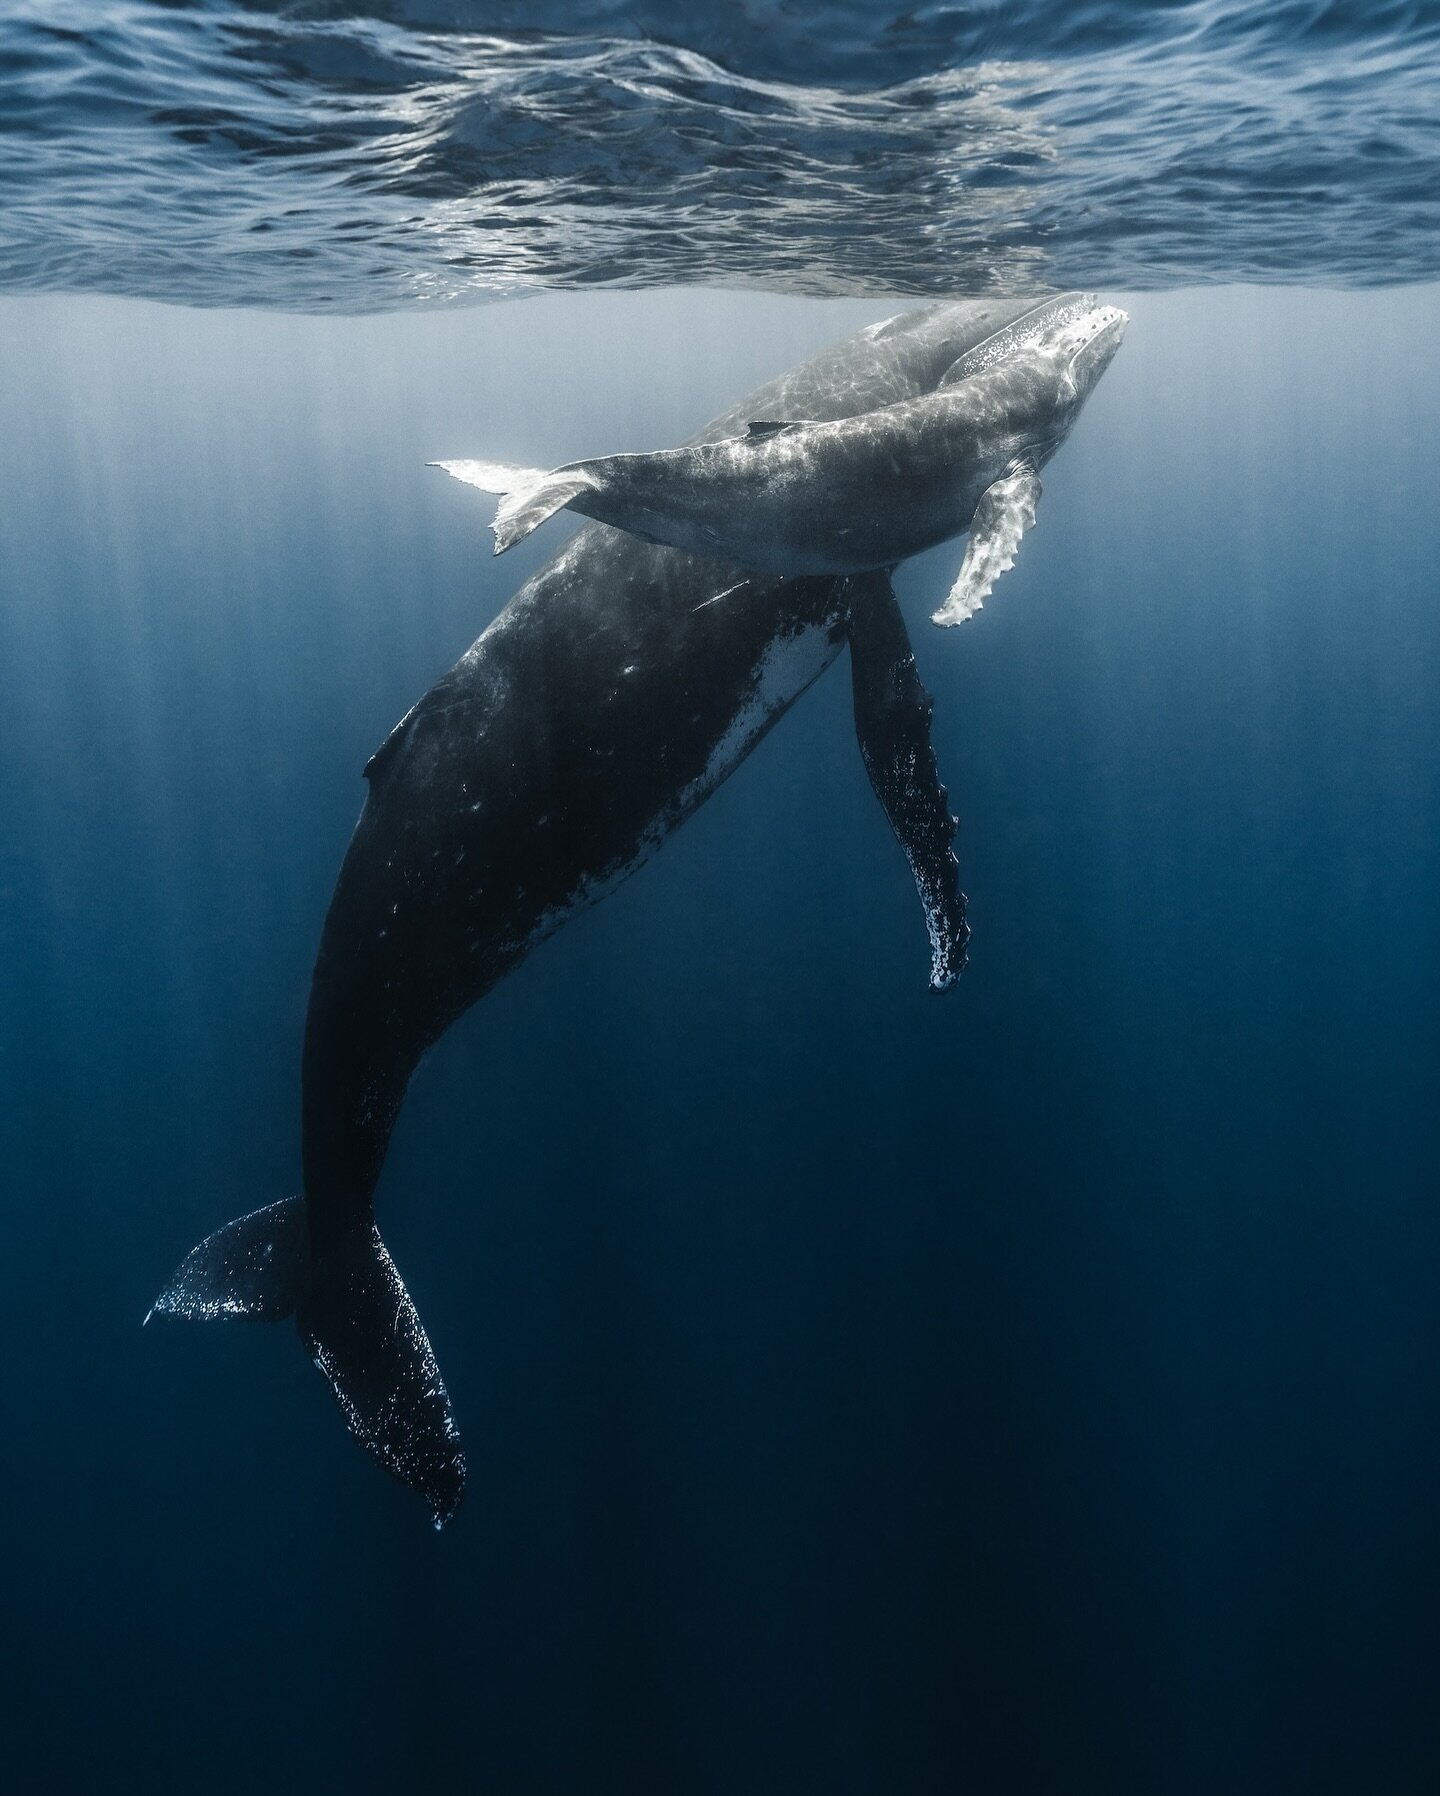 The light does its magic underwater as a mother and her calf come up to the surface&hellip; 

.
.
.
.
.
.
.
.
#whales #whale #surf #whalewatching #nature #dolphins #wildlife #sea #humpbackwhale #marinelife #picoftheday #instagood #animals #whalewatch